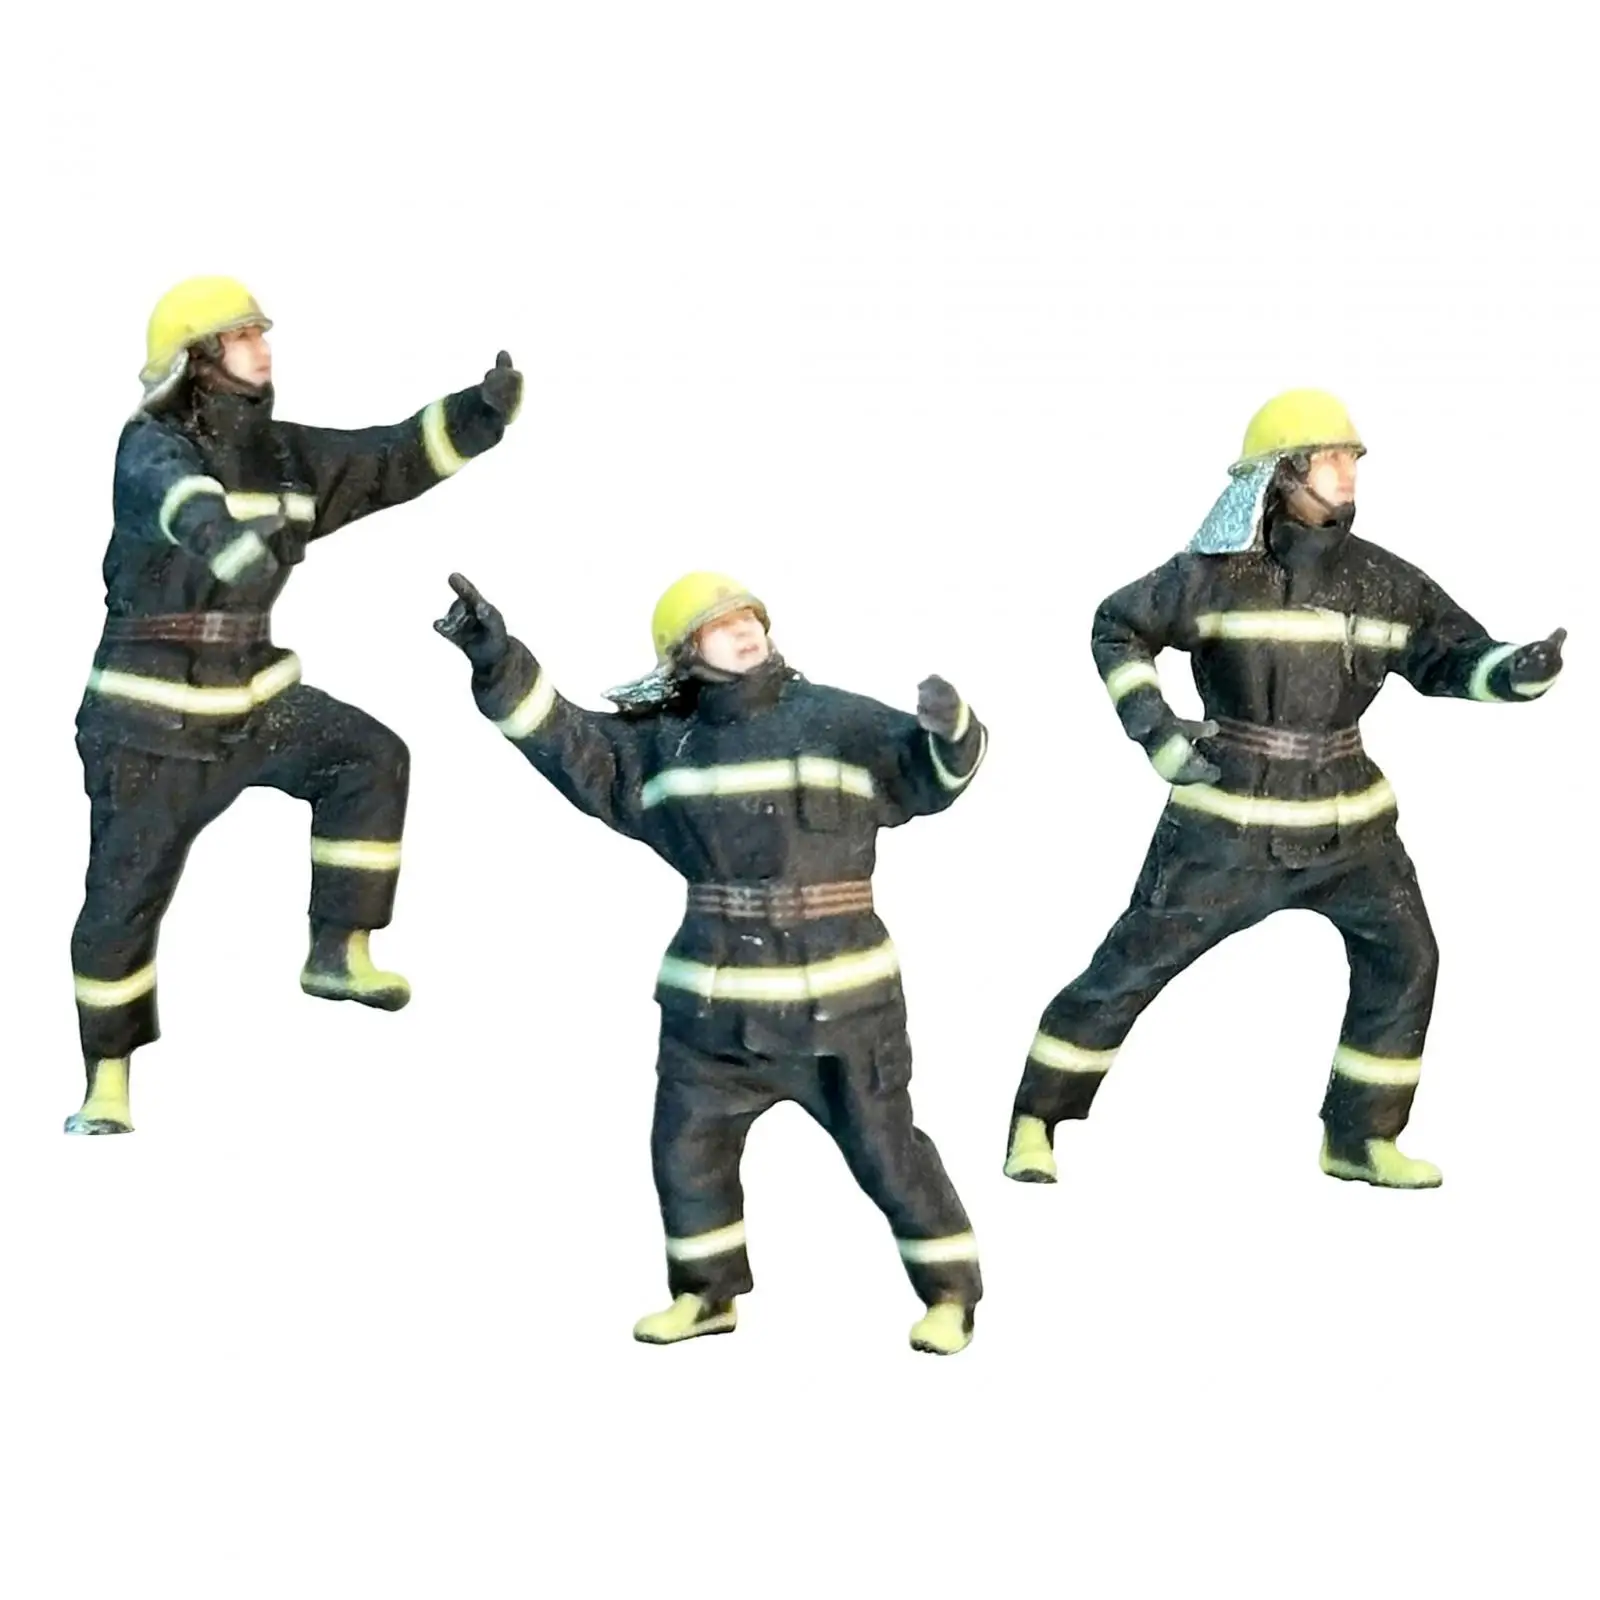 3 Pieces Miniature Firefighter Figures Realistic Model Trains People Figures for Diorama Micro Landscapes Decor Accessories